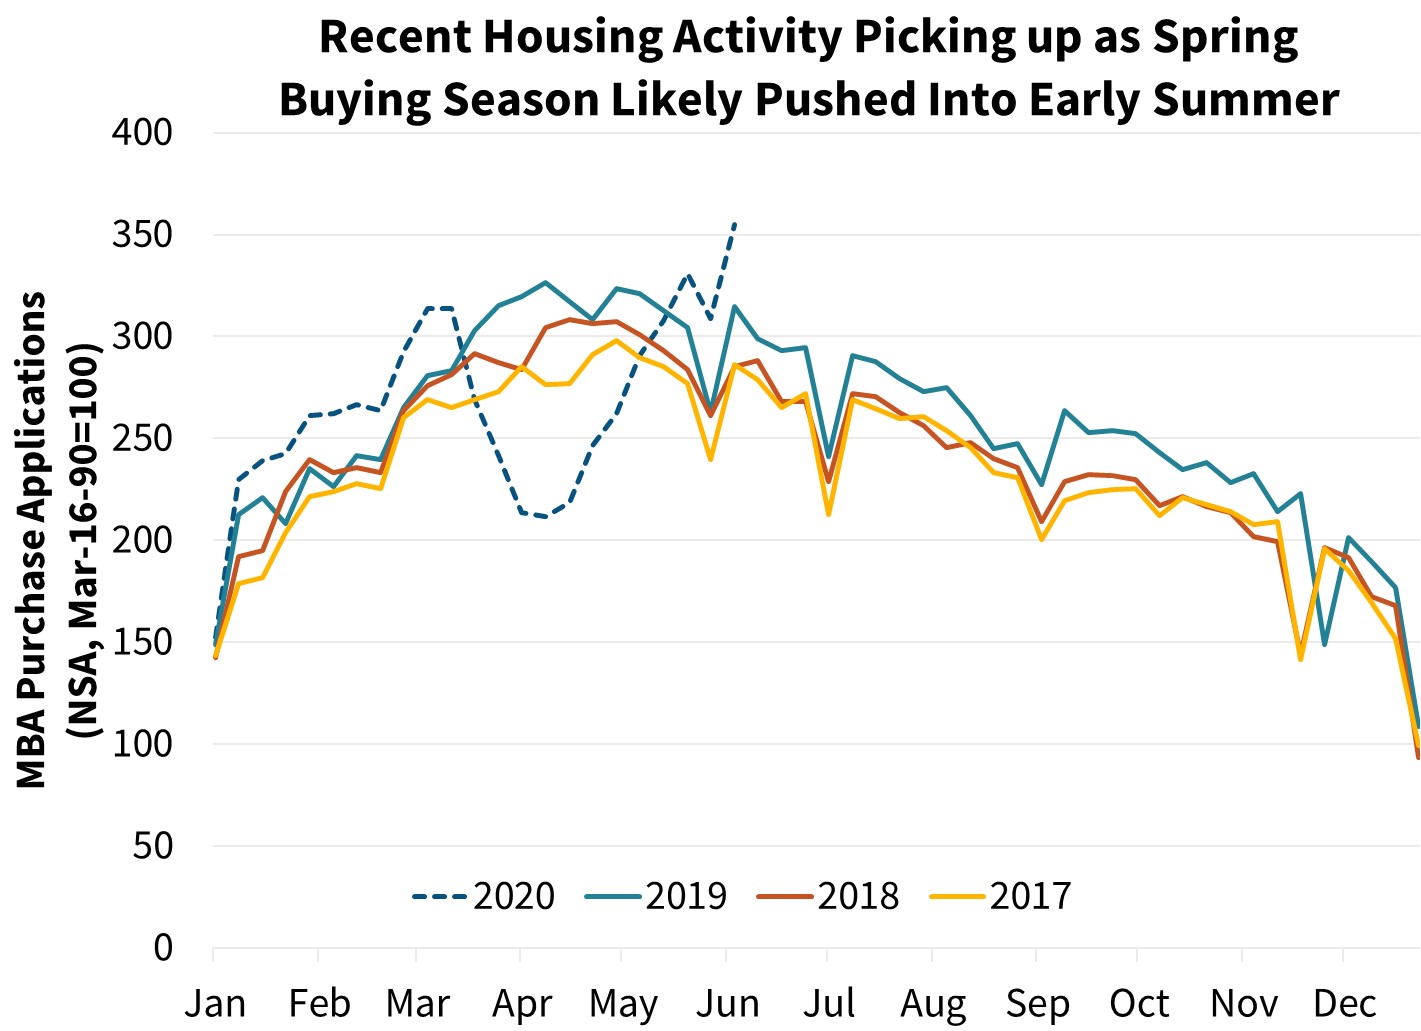  Recent Housing Activity Picking up as Spring Buying Season Likely Pushed Into Early Summer